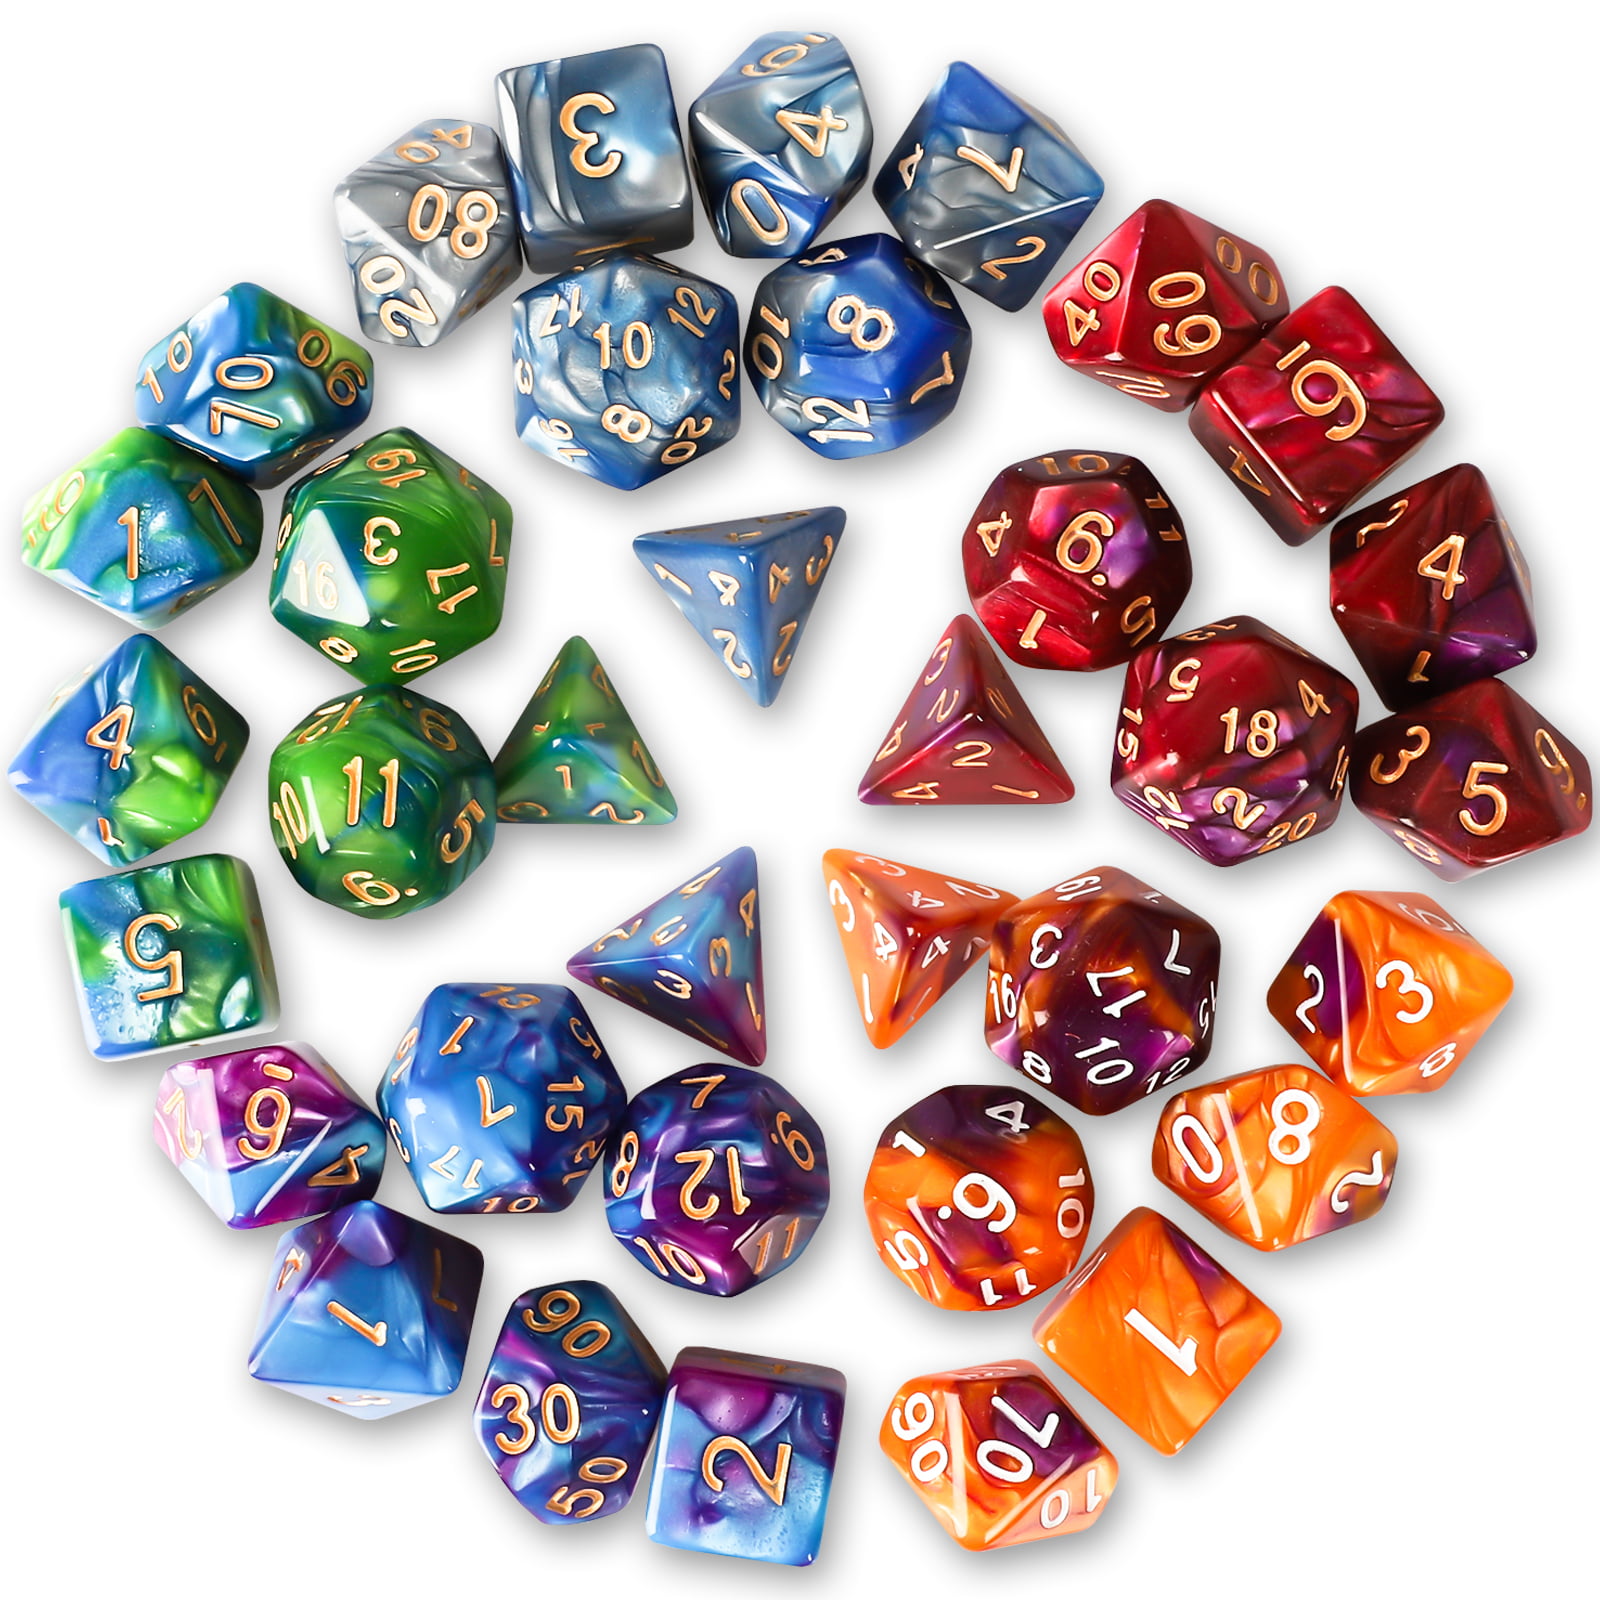 49x Polyhedral Dice Die Double-Color for Dungeons /& Dragons RPG Table Games